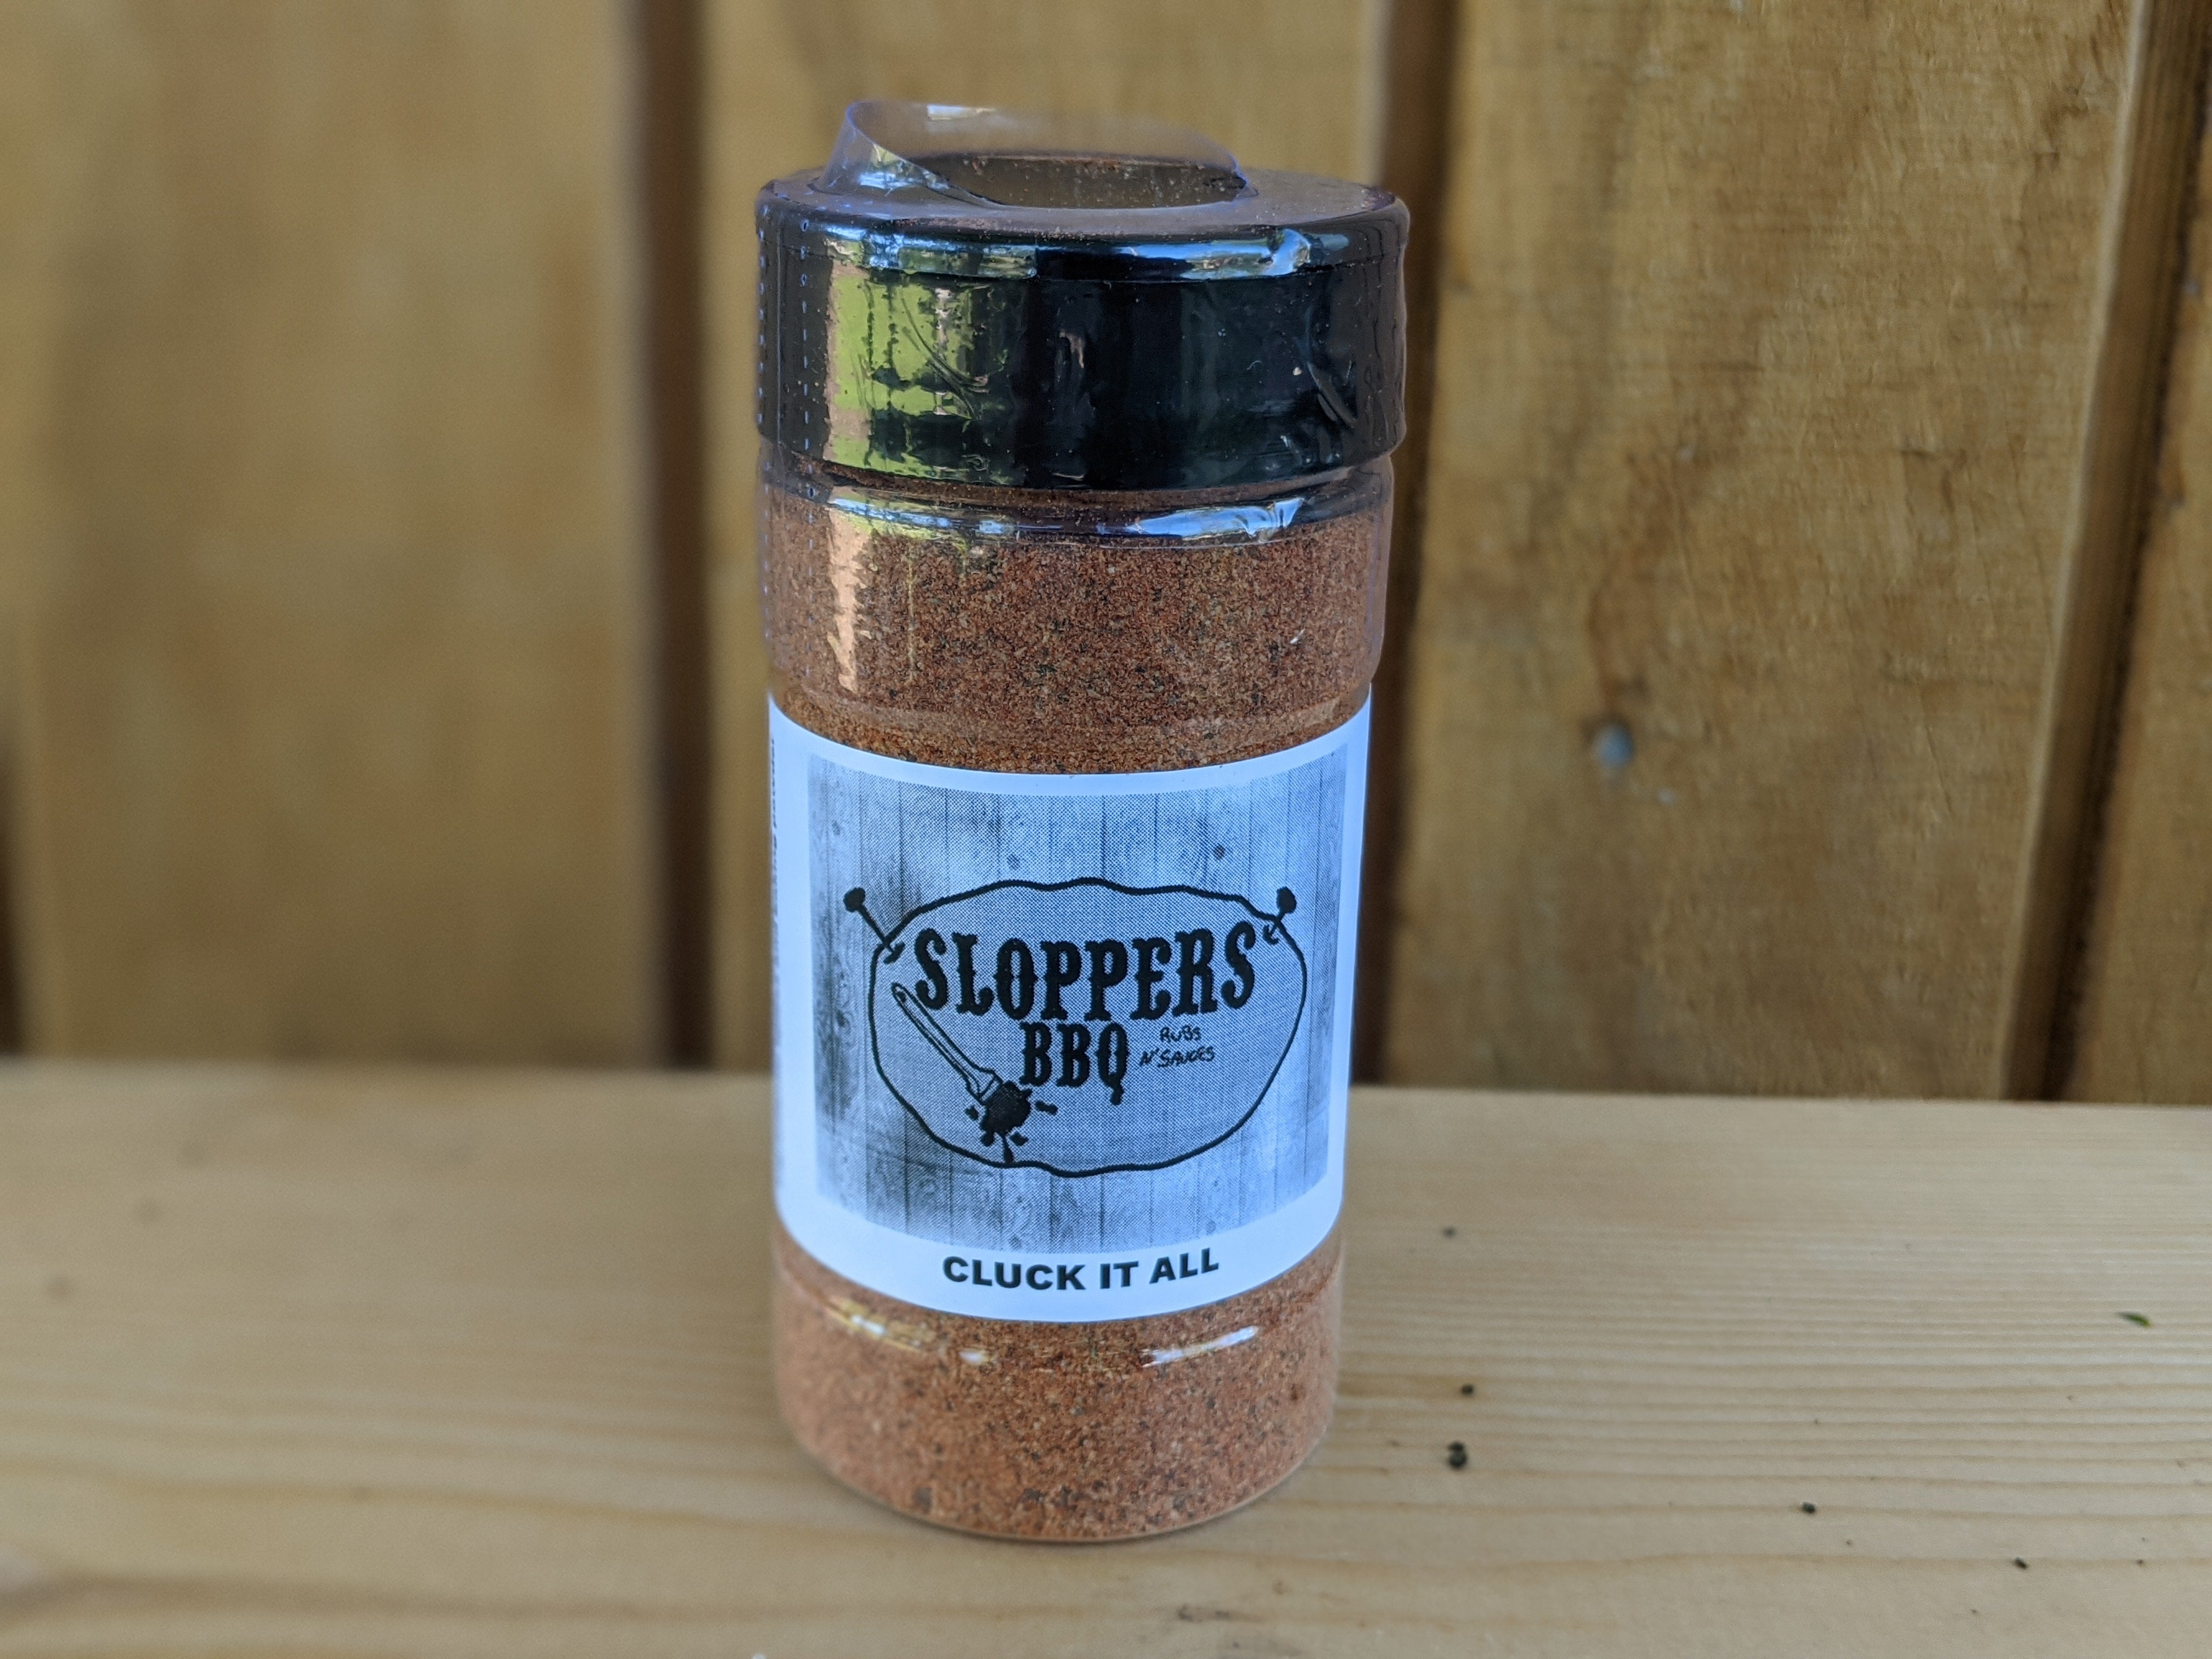 Sloppers BBQ Cluck It All Rub